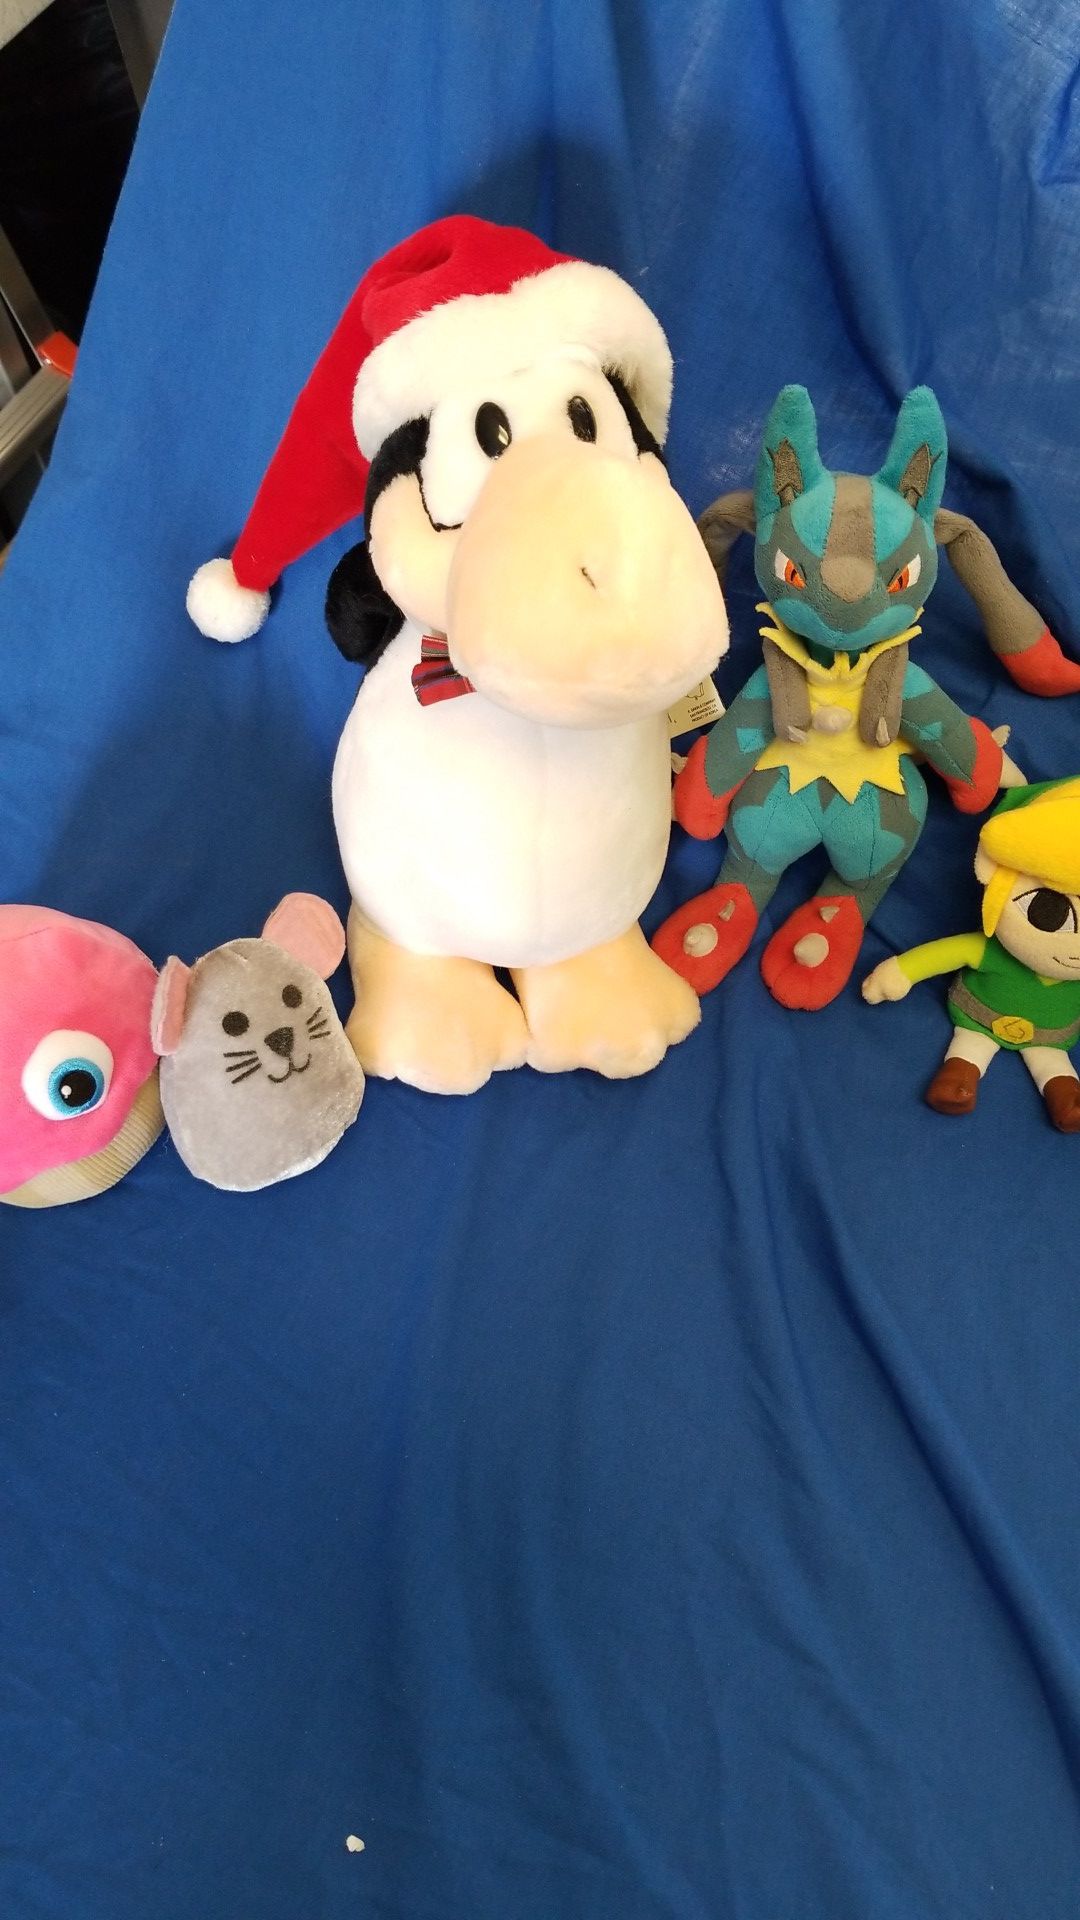 Assorted plushes